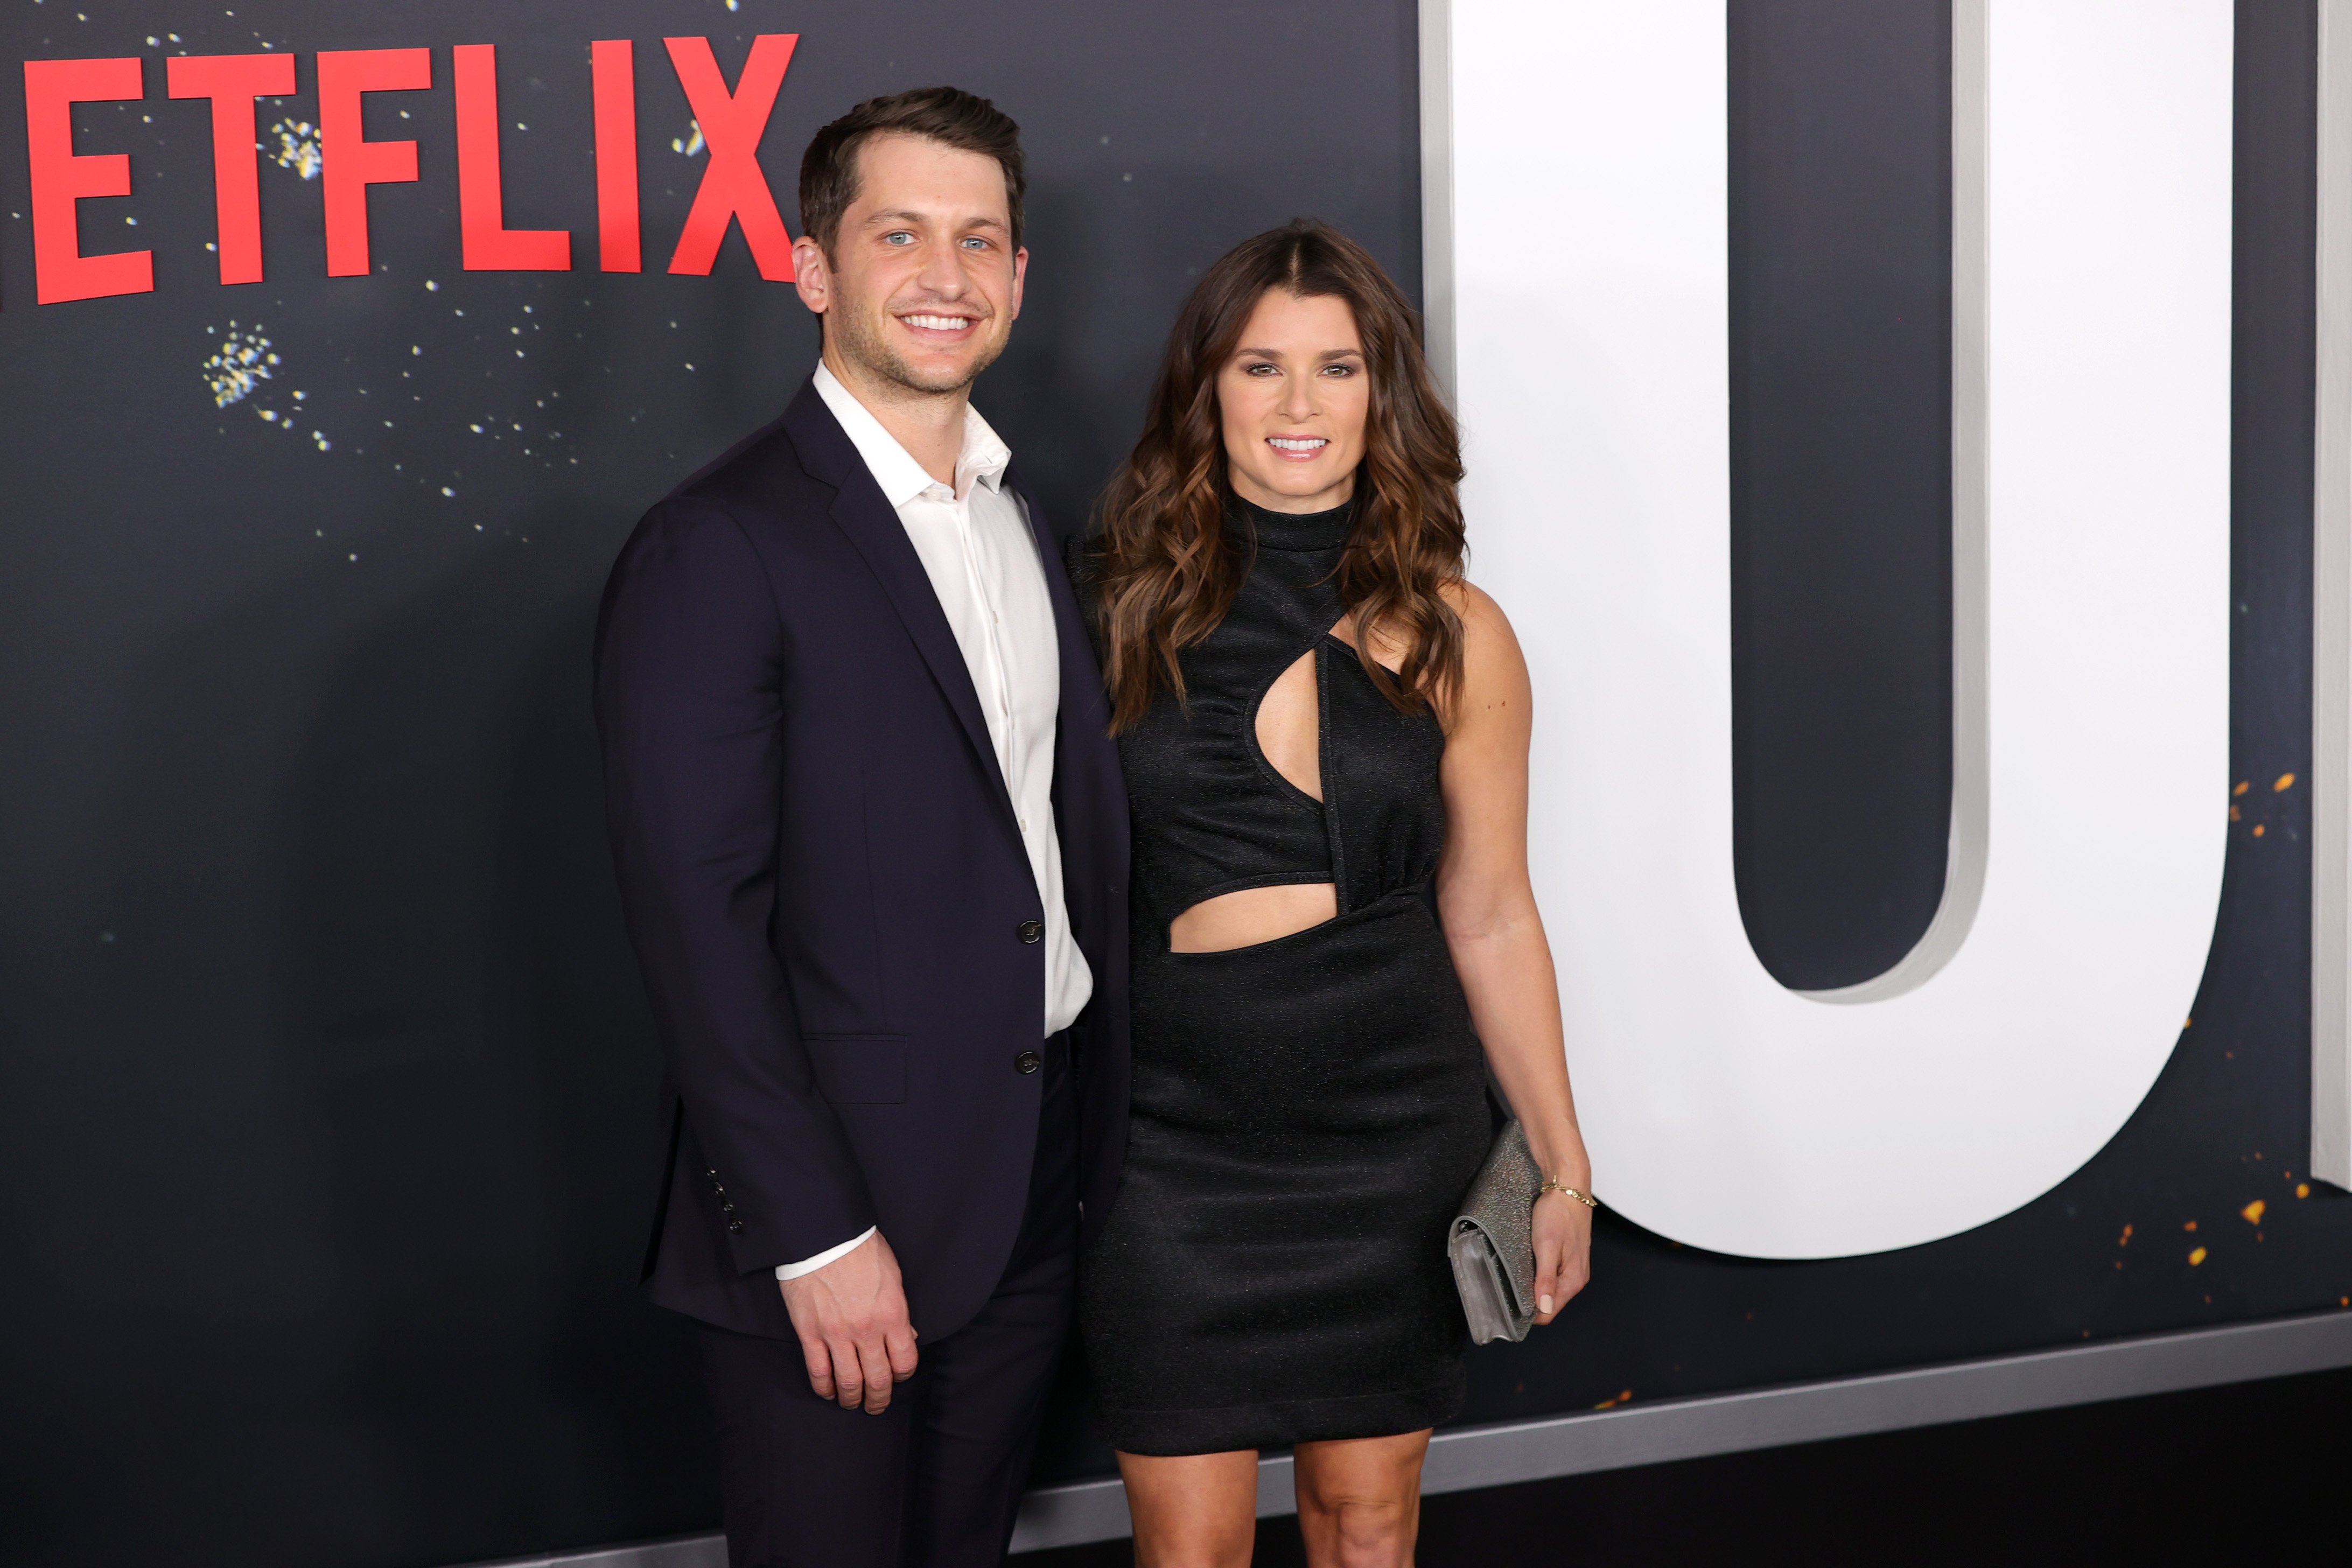 Carter Comstock and Danica Patrick pose together on the carpet at the world premiere of Netflix's Don't Look Up